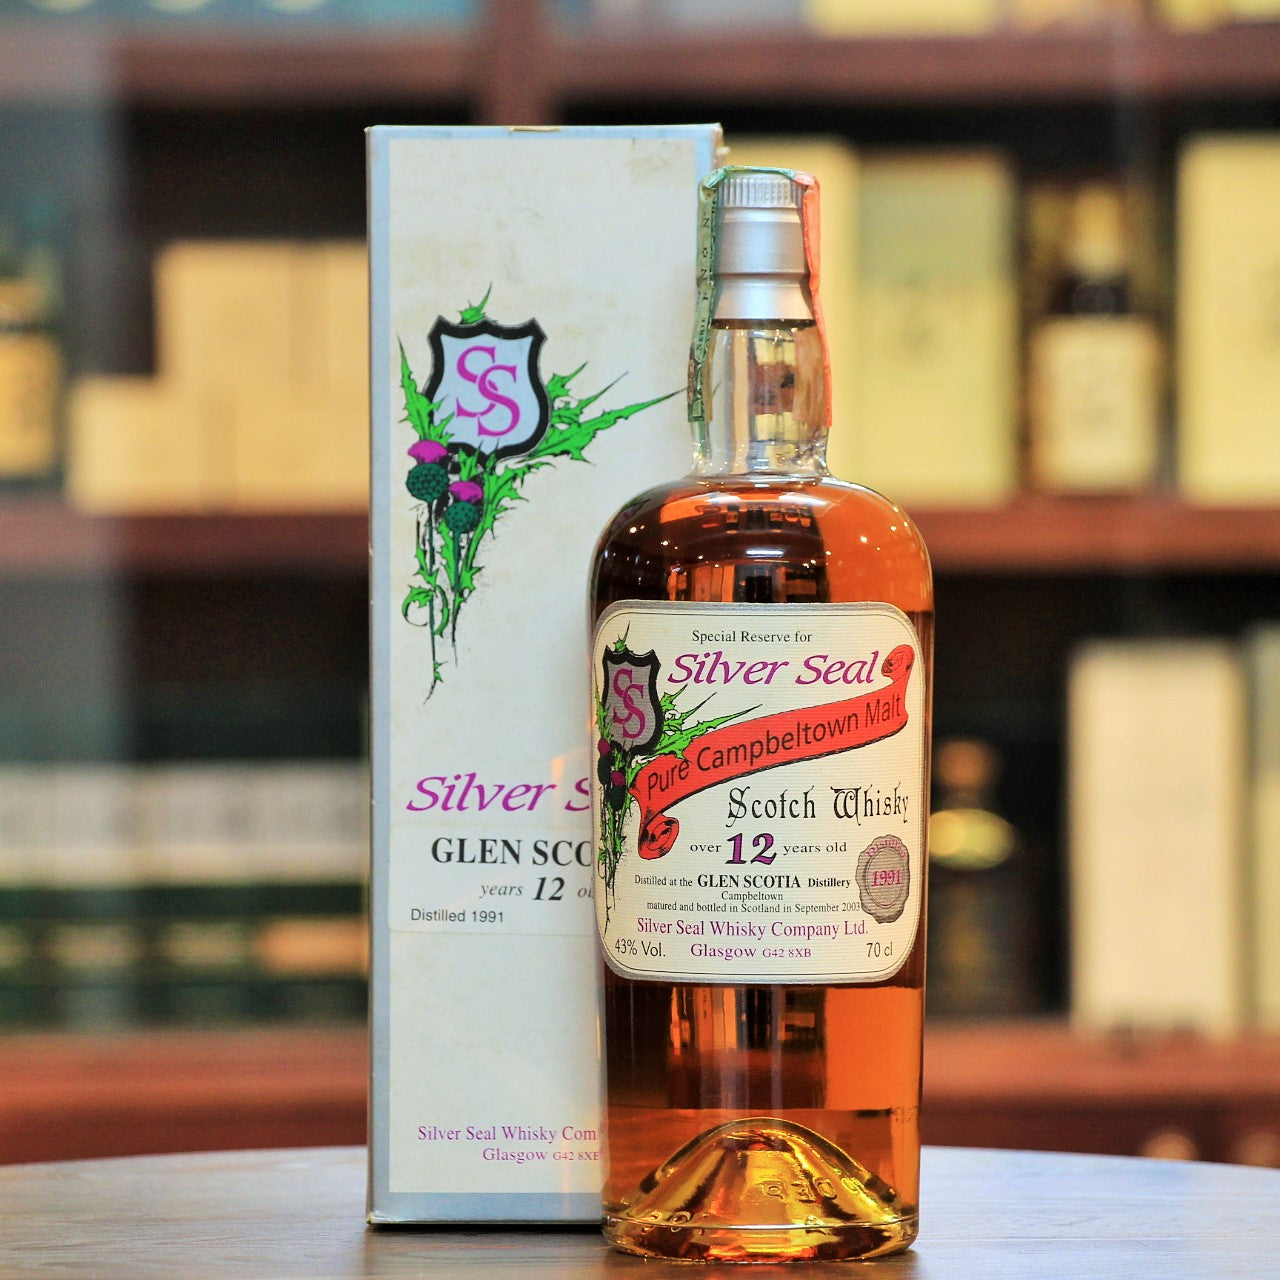 Glen Scotia 12 Years Silver Seal Vintage 1991, A rare bottling of this campbeltown whisky by the Italian IB, Silver Seal. A total of 655 bottles were released.